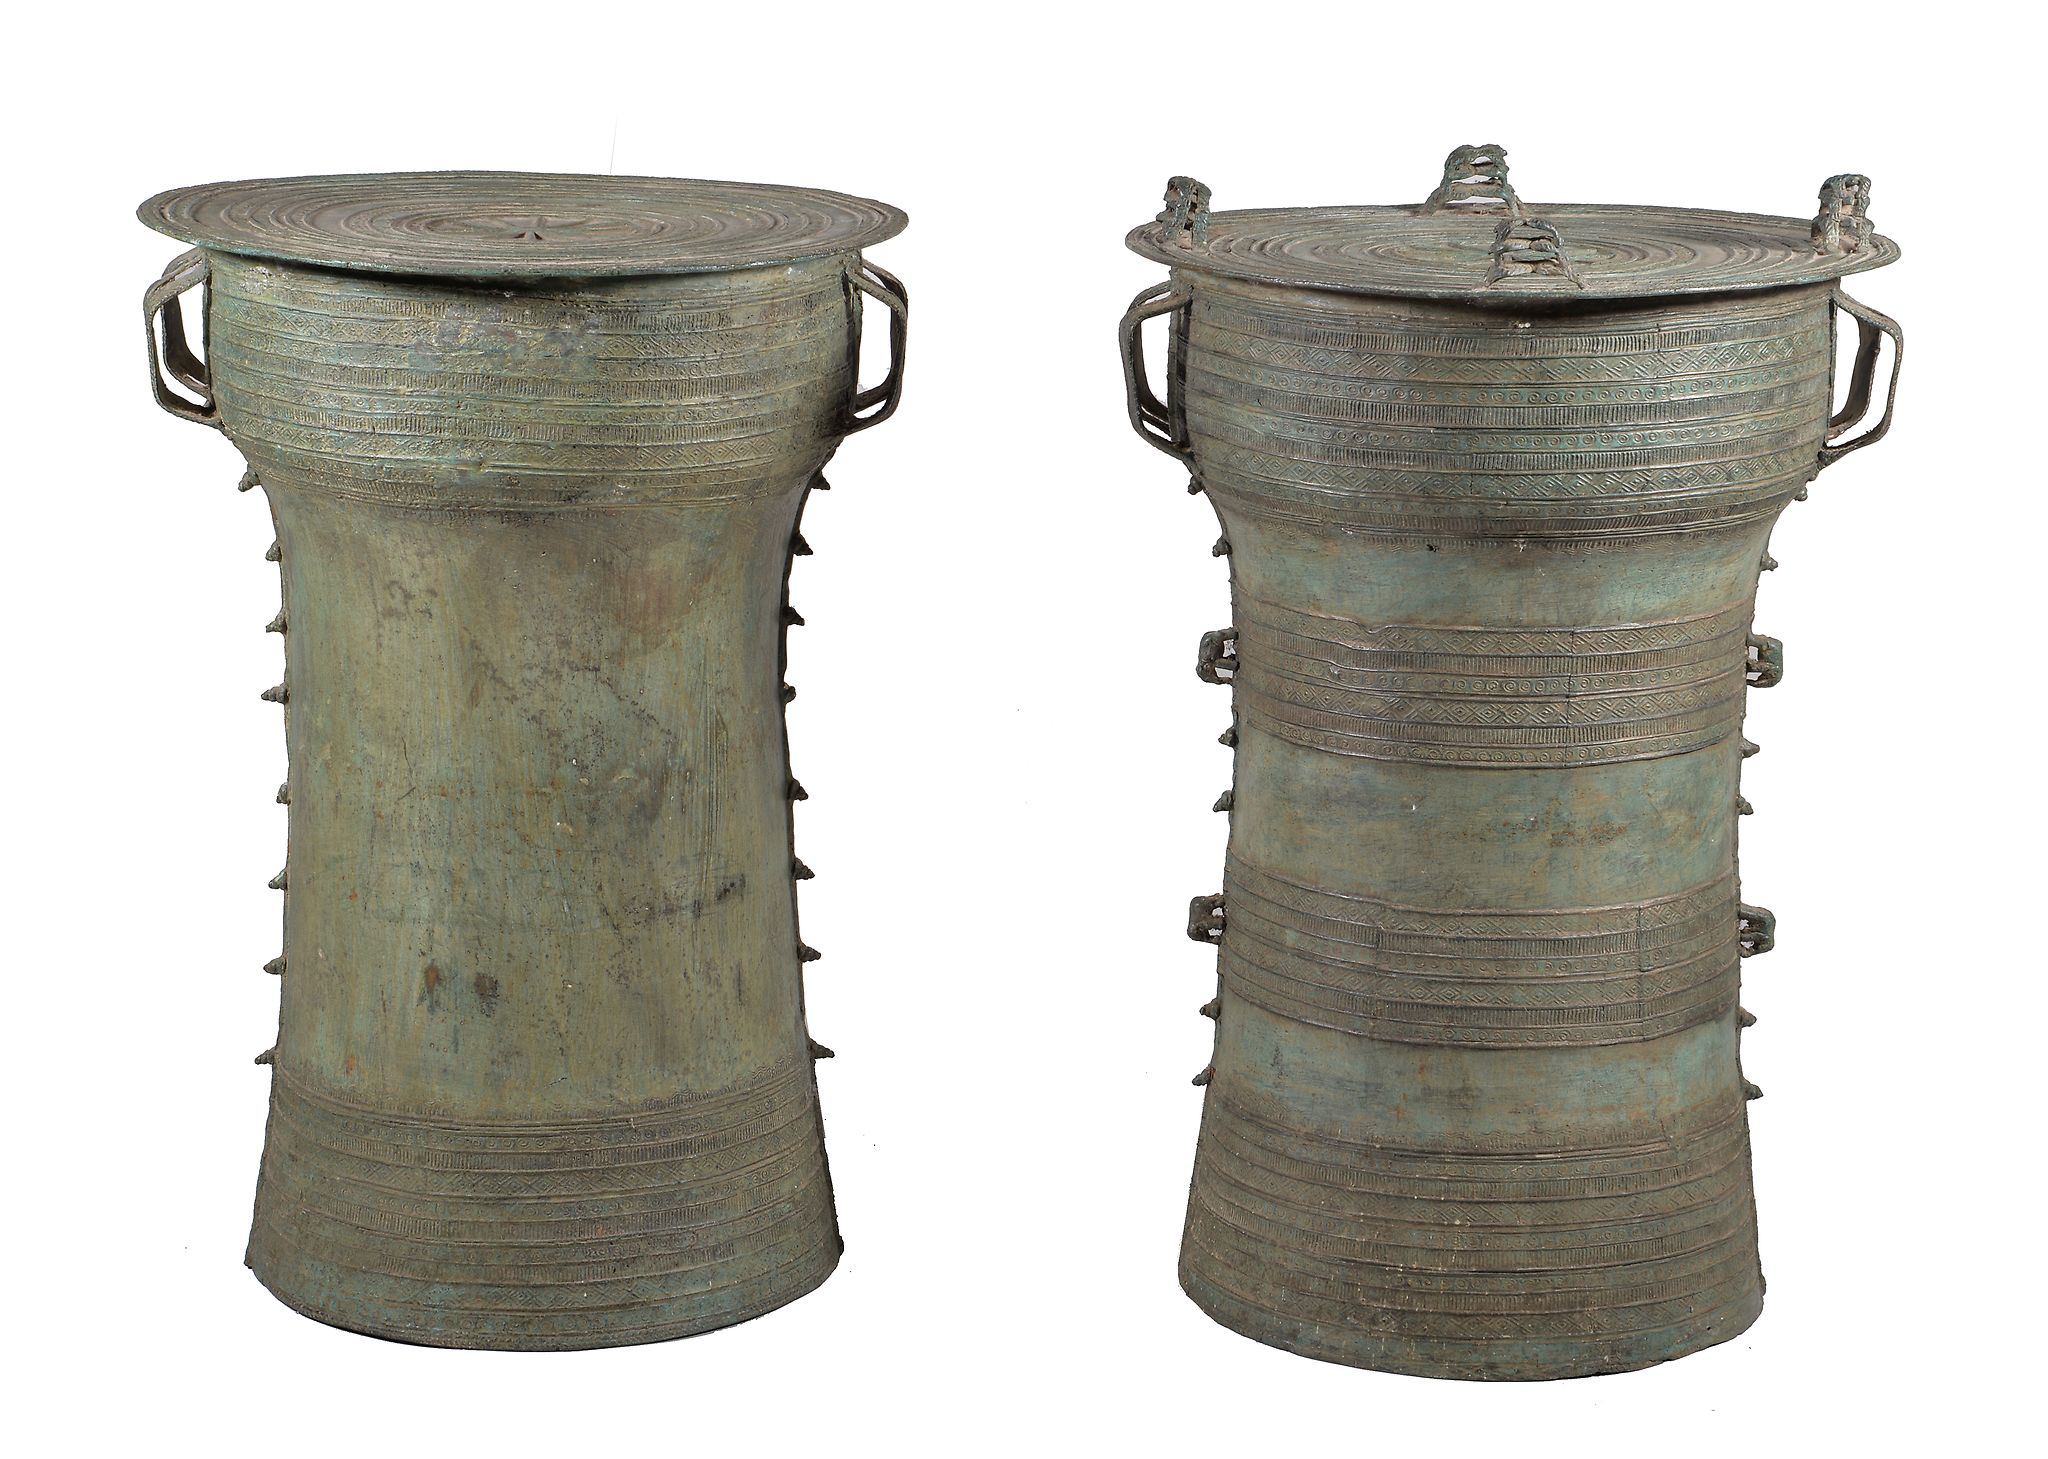 Two Burmese cast bronze 'rain drums', each of waisted cylindrical form with overlapping top and